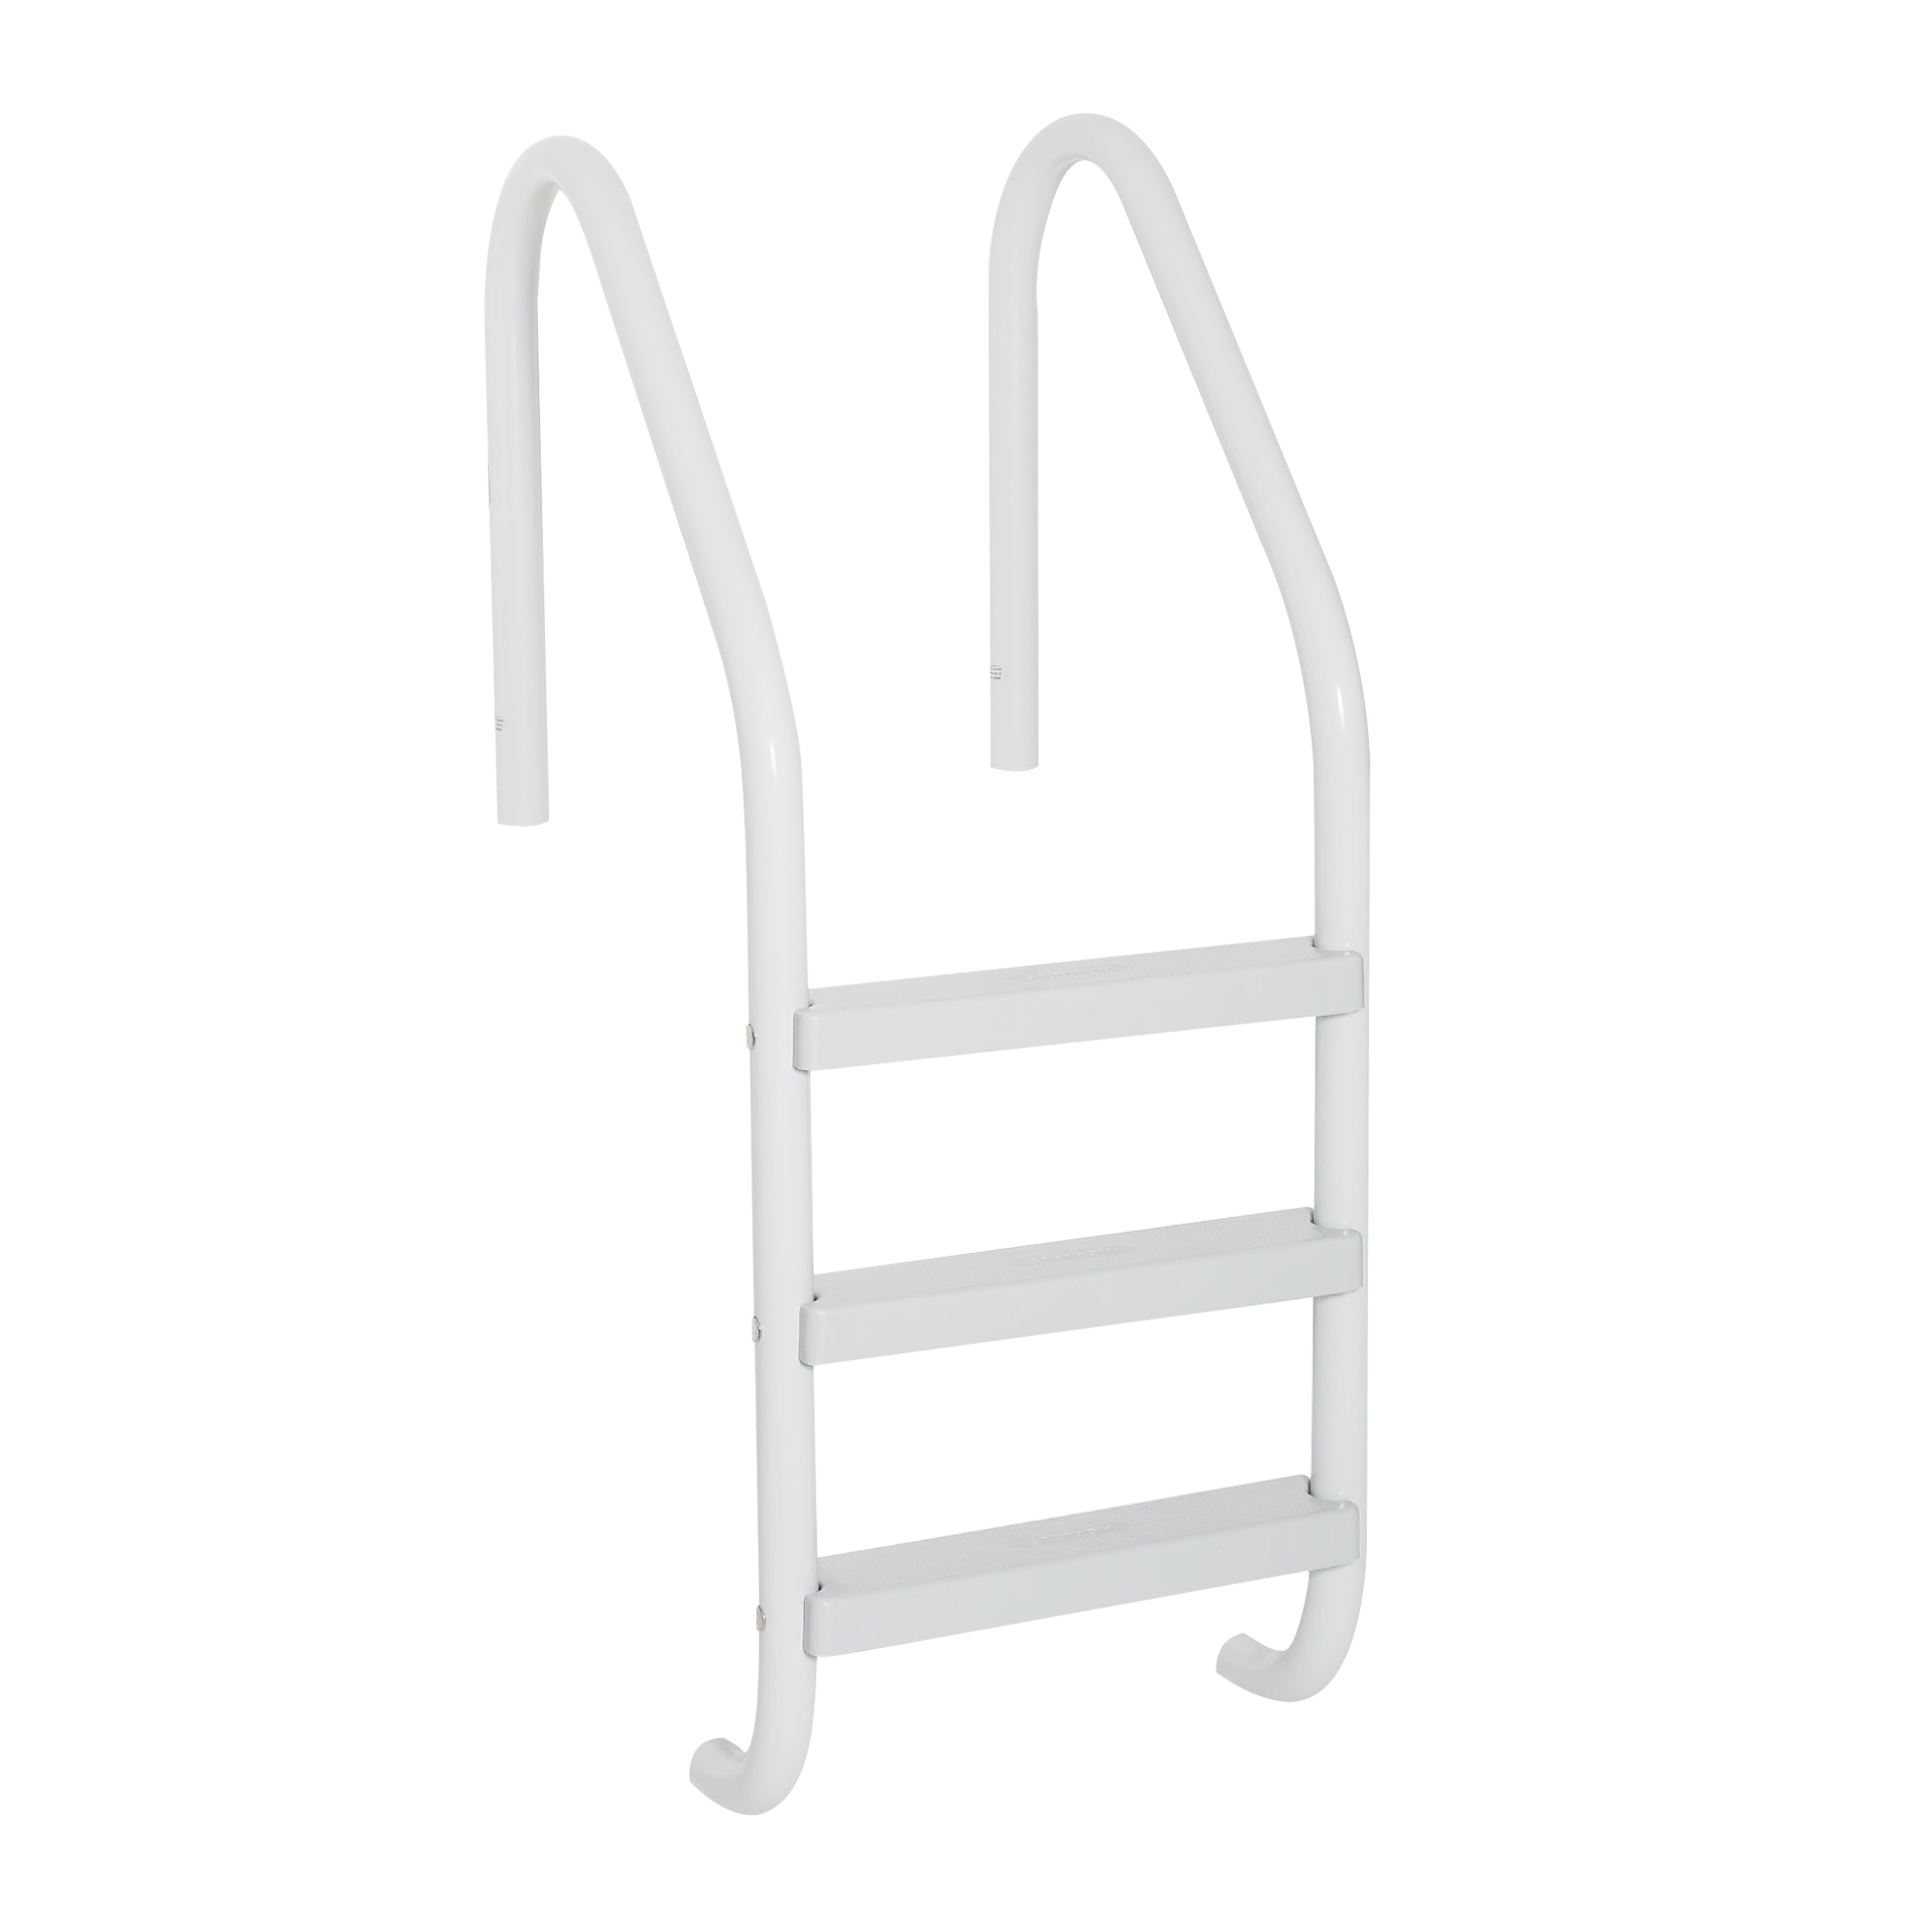 3 Step High Impact Polymer In-Ground Pool Ladder - White